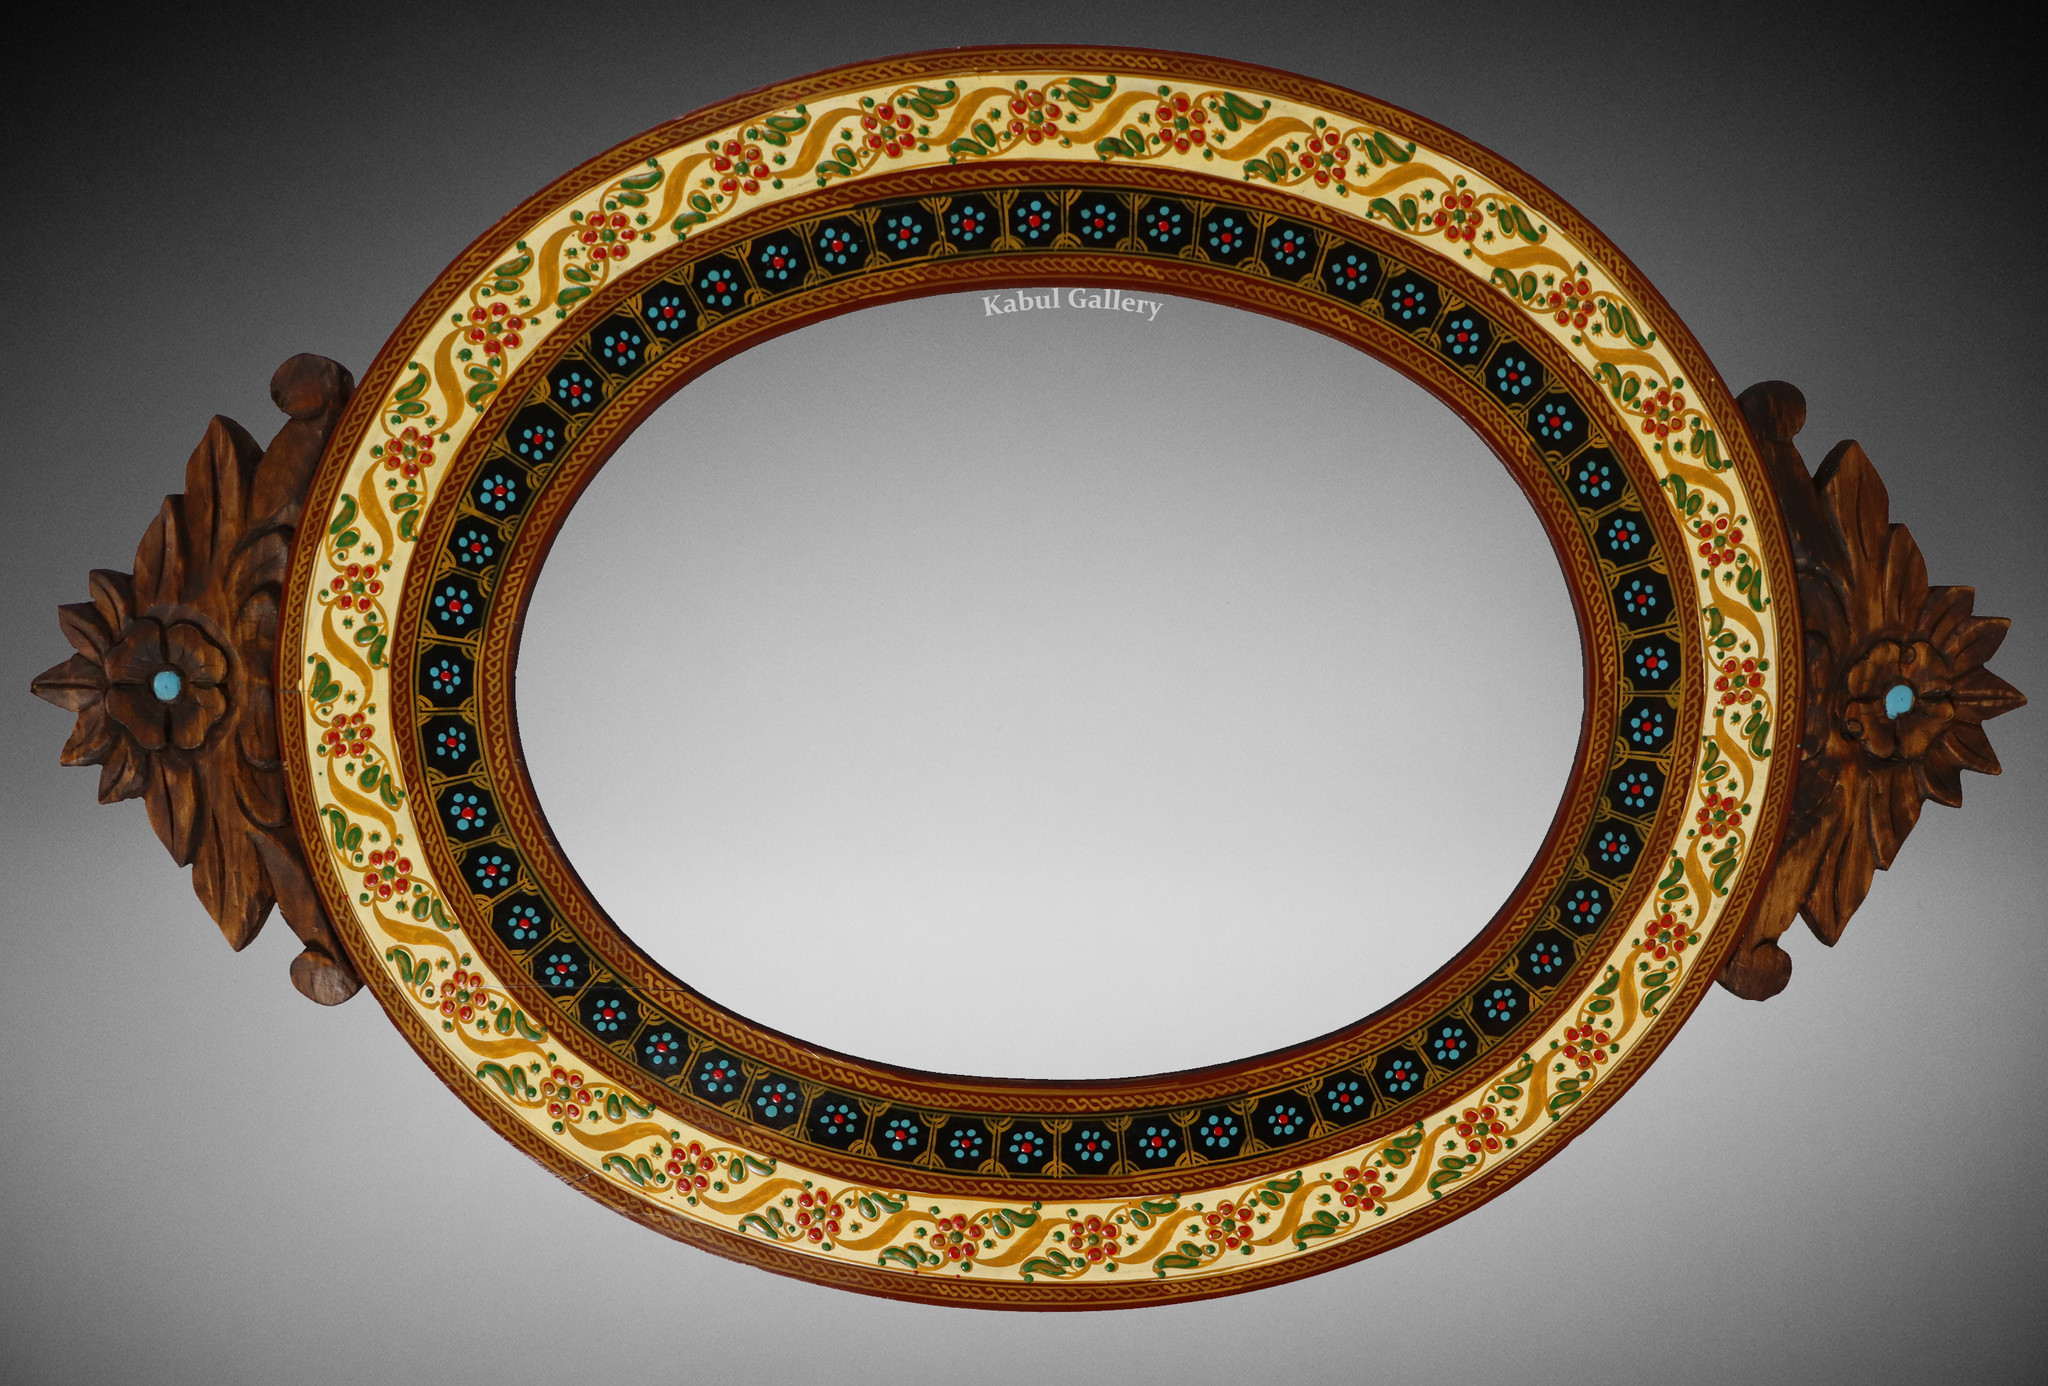 Mughal relief mirror or picture frame